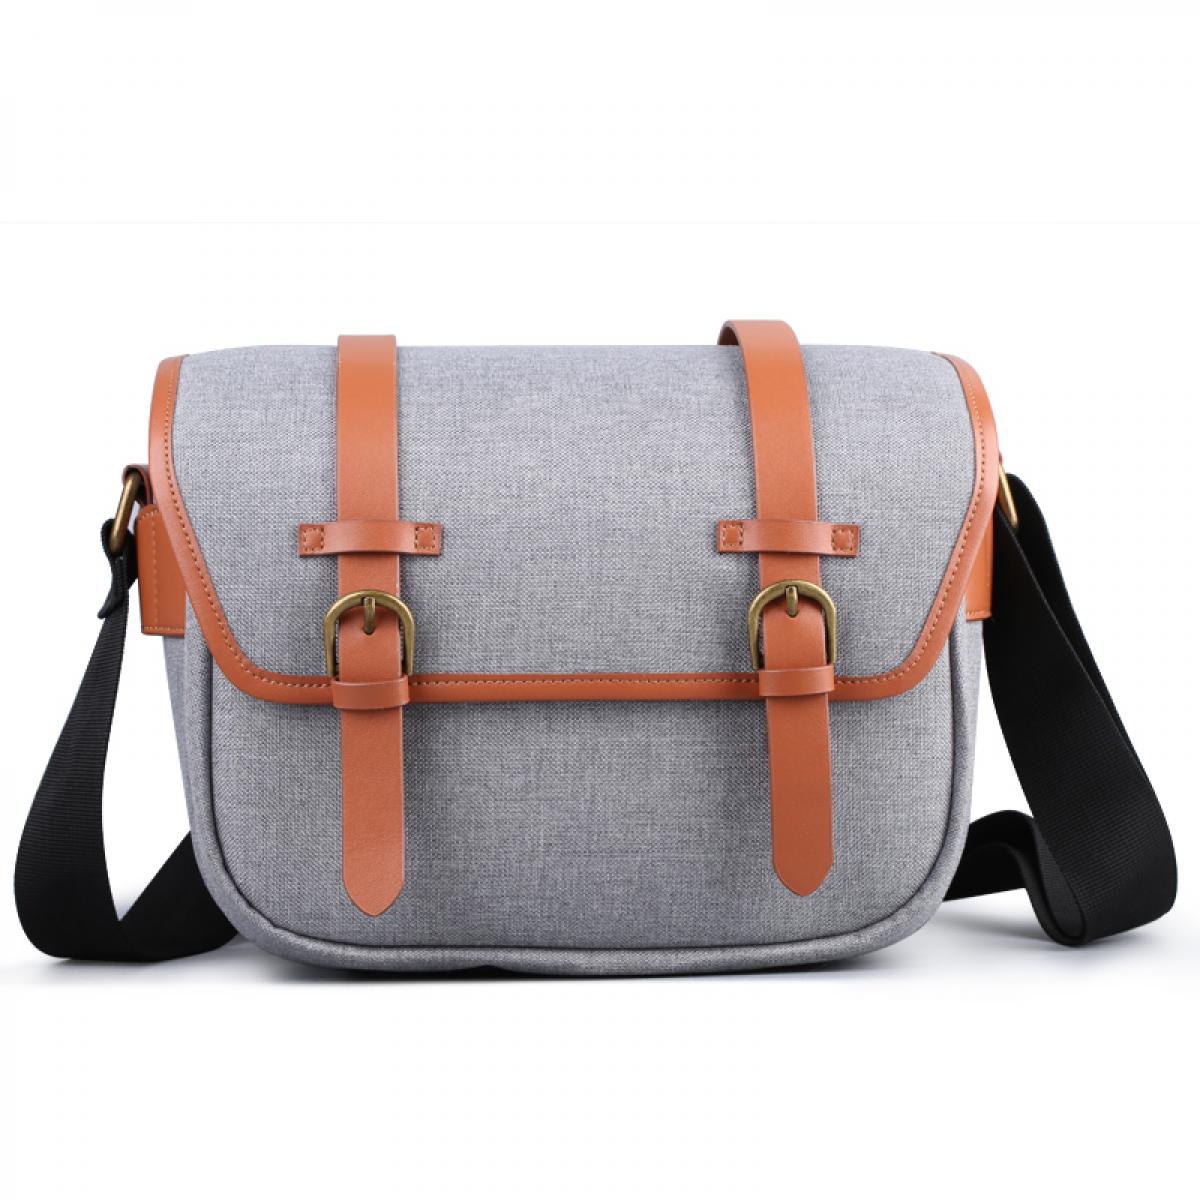 K&F Compact Messenger Camera Shoulder Bag with Removable Dividers and Cleaning Kit for Travel Photography for DLSR Cameras Light Grey